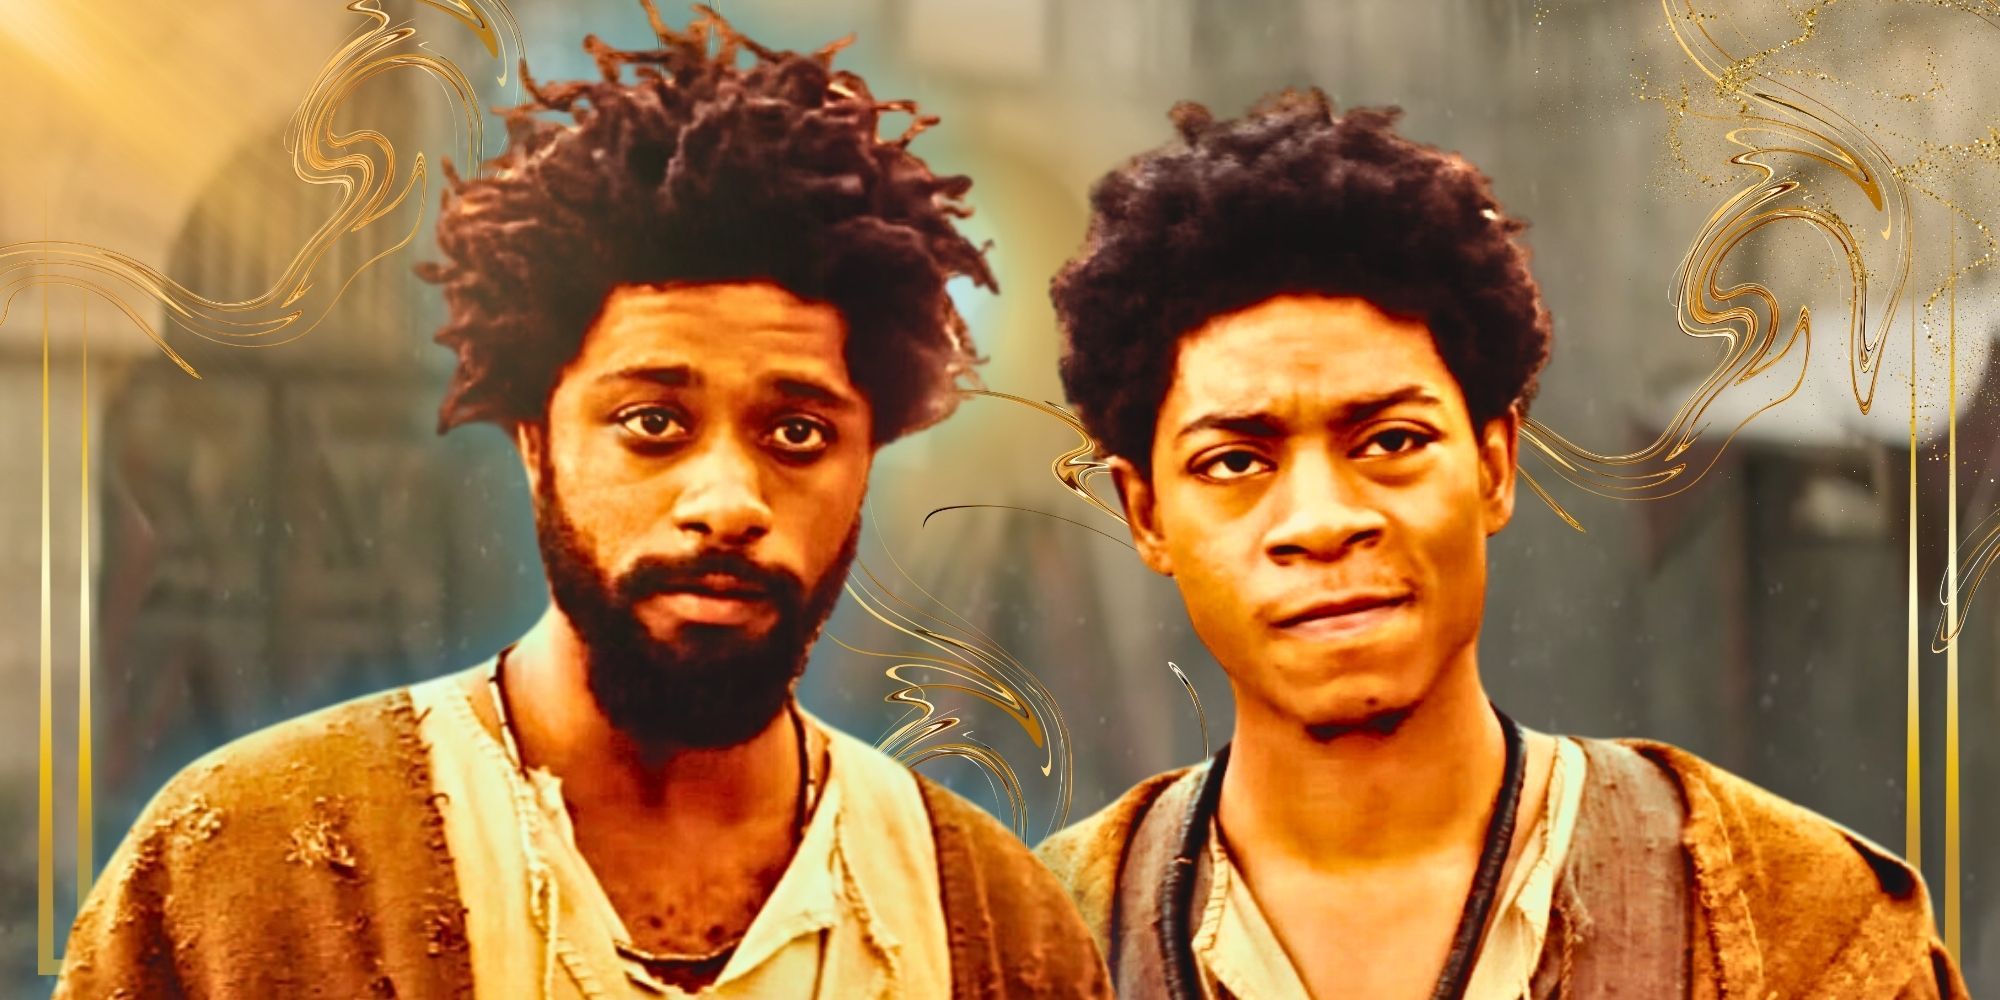 LaKeith Stanfield Is Good In Daring & Significant Biblical Comedy